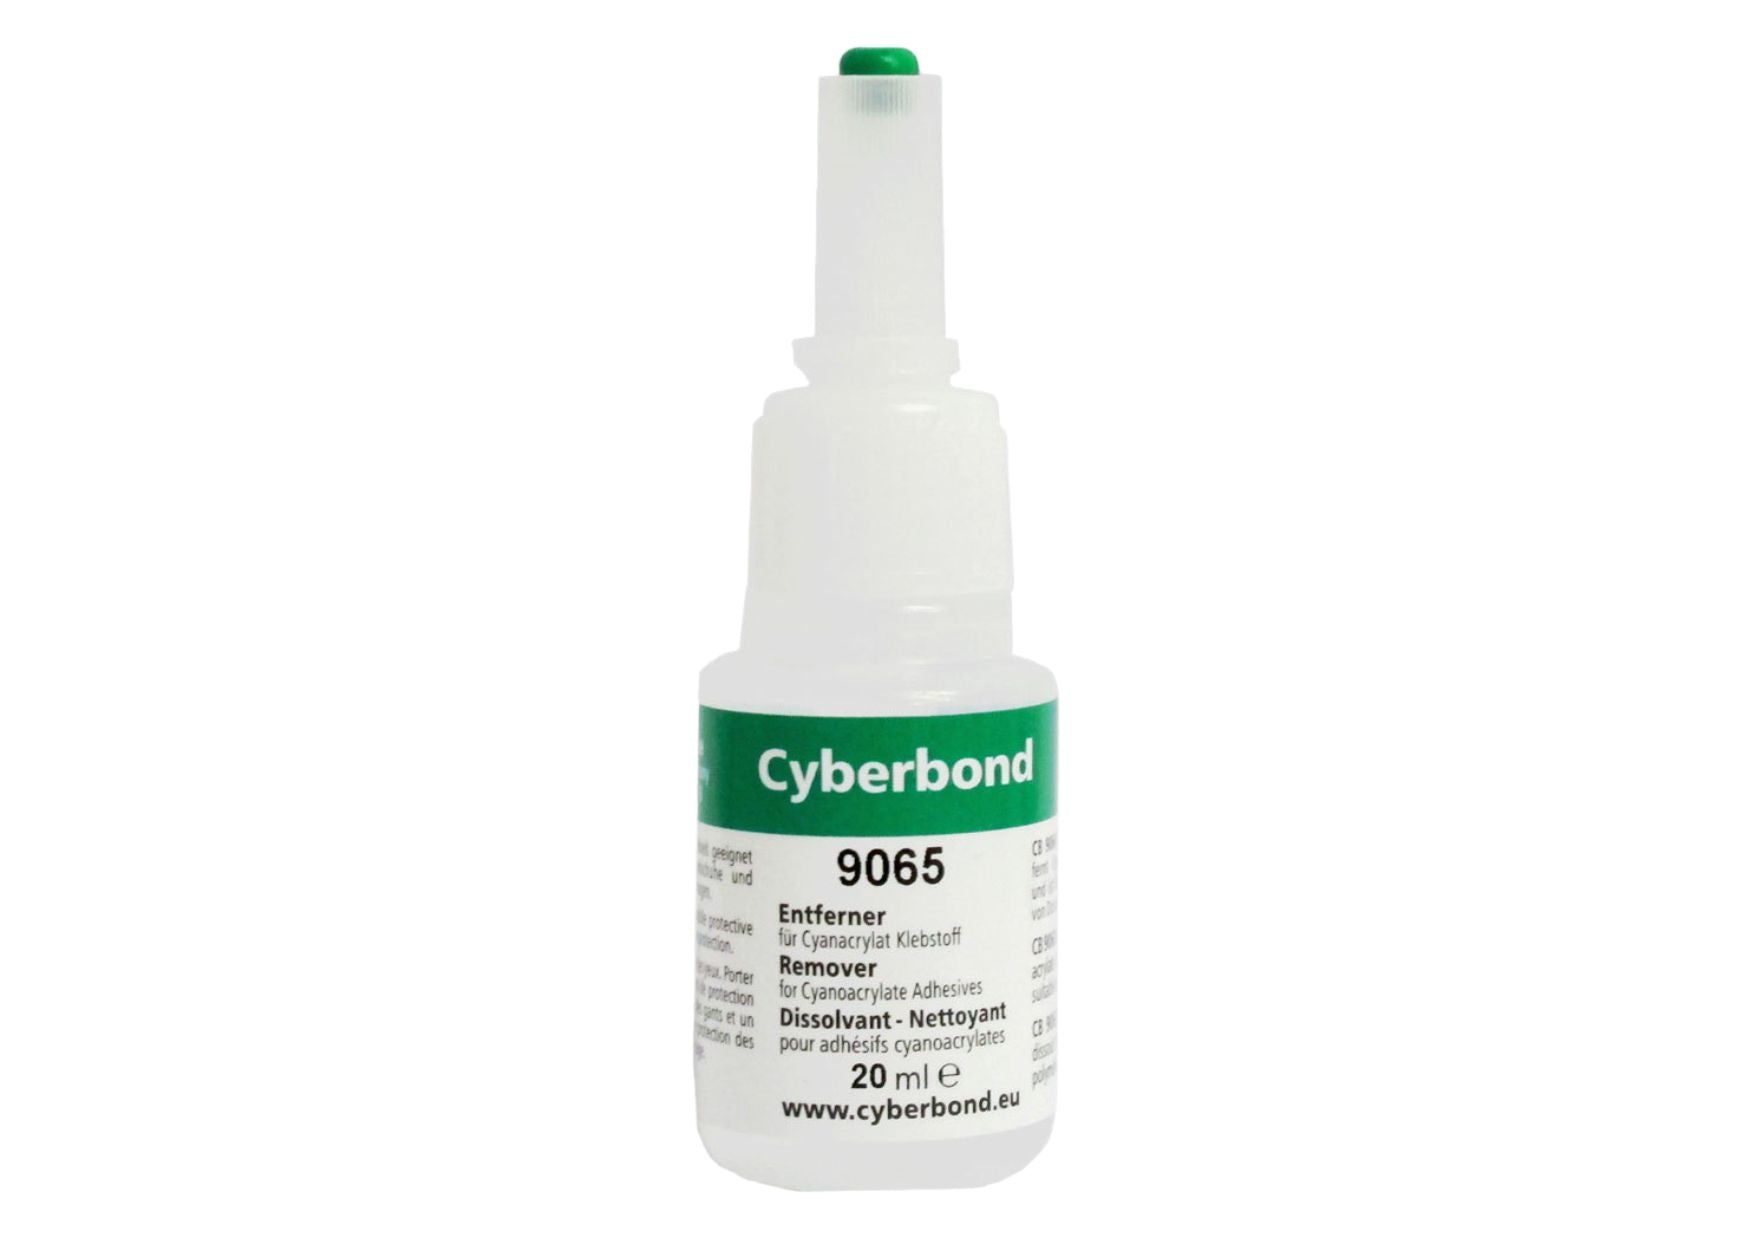 Cyberbond 9065 remover for cyanoacrylate adhesive